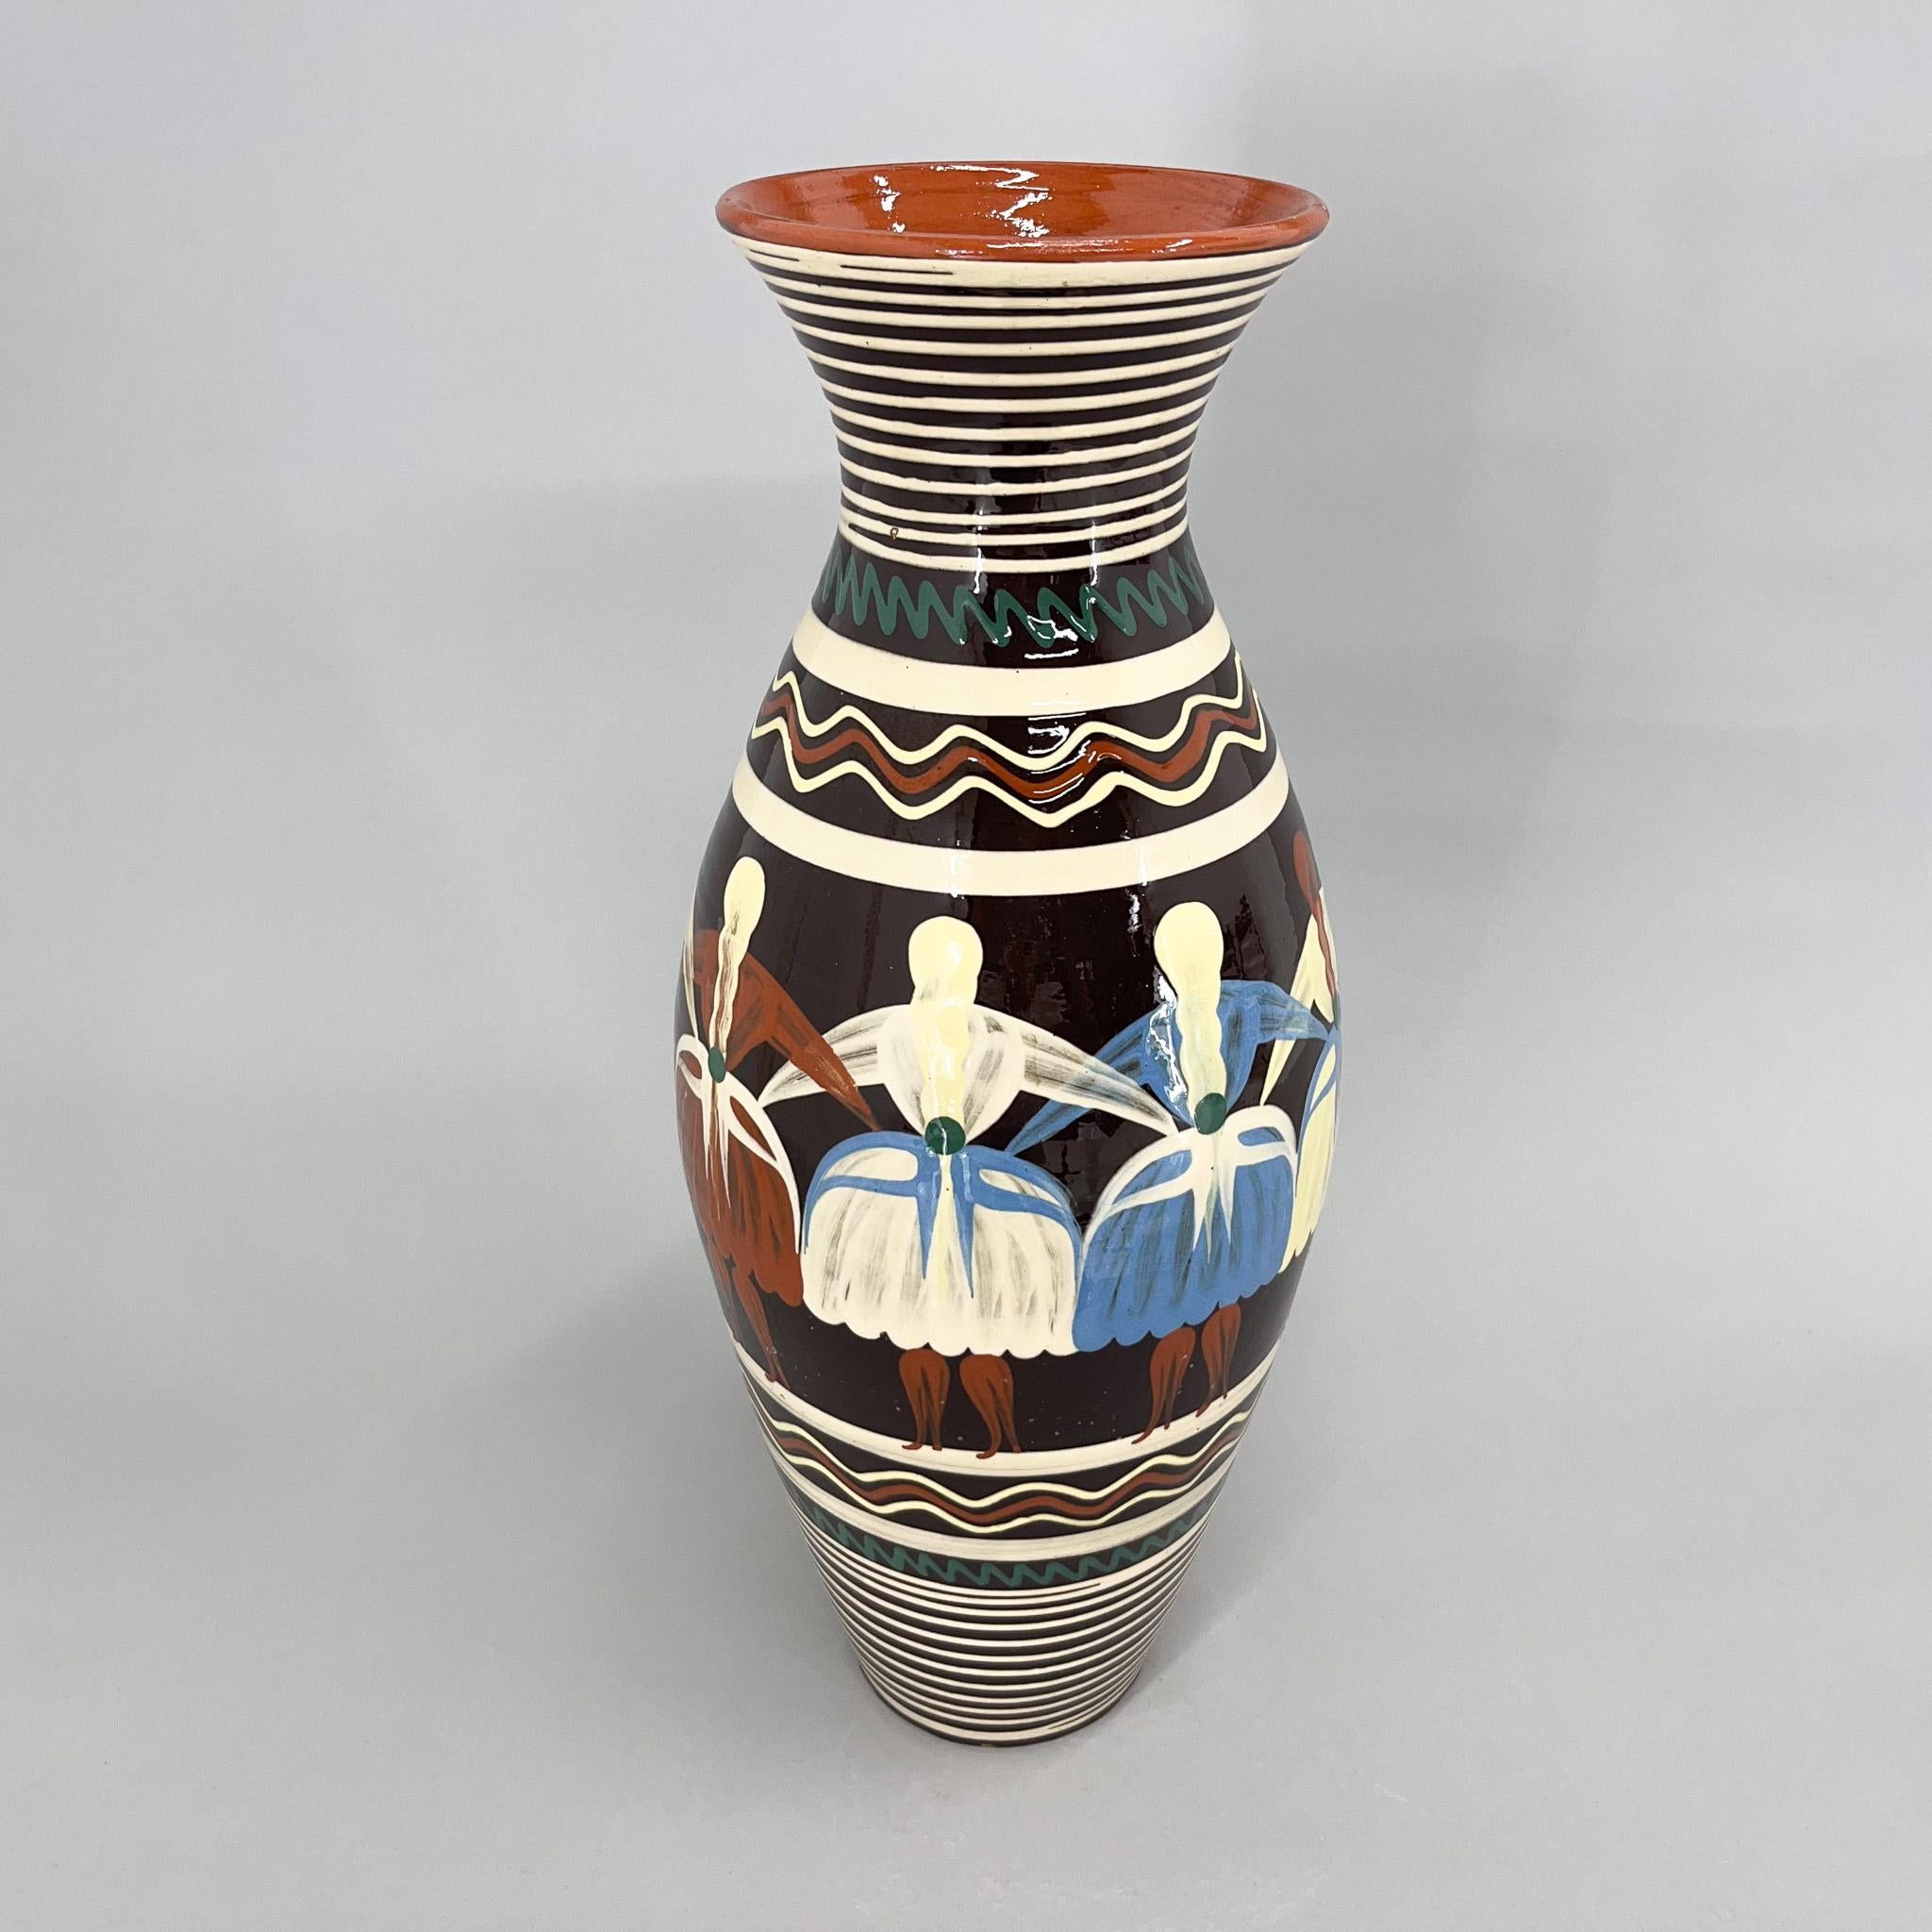 Vintage vase or floor vase made of glazed ceramics with motif of dancing women in typical national costumes.